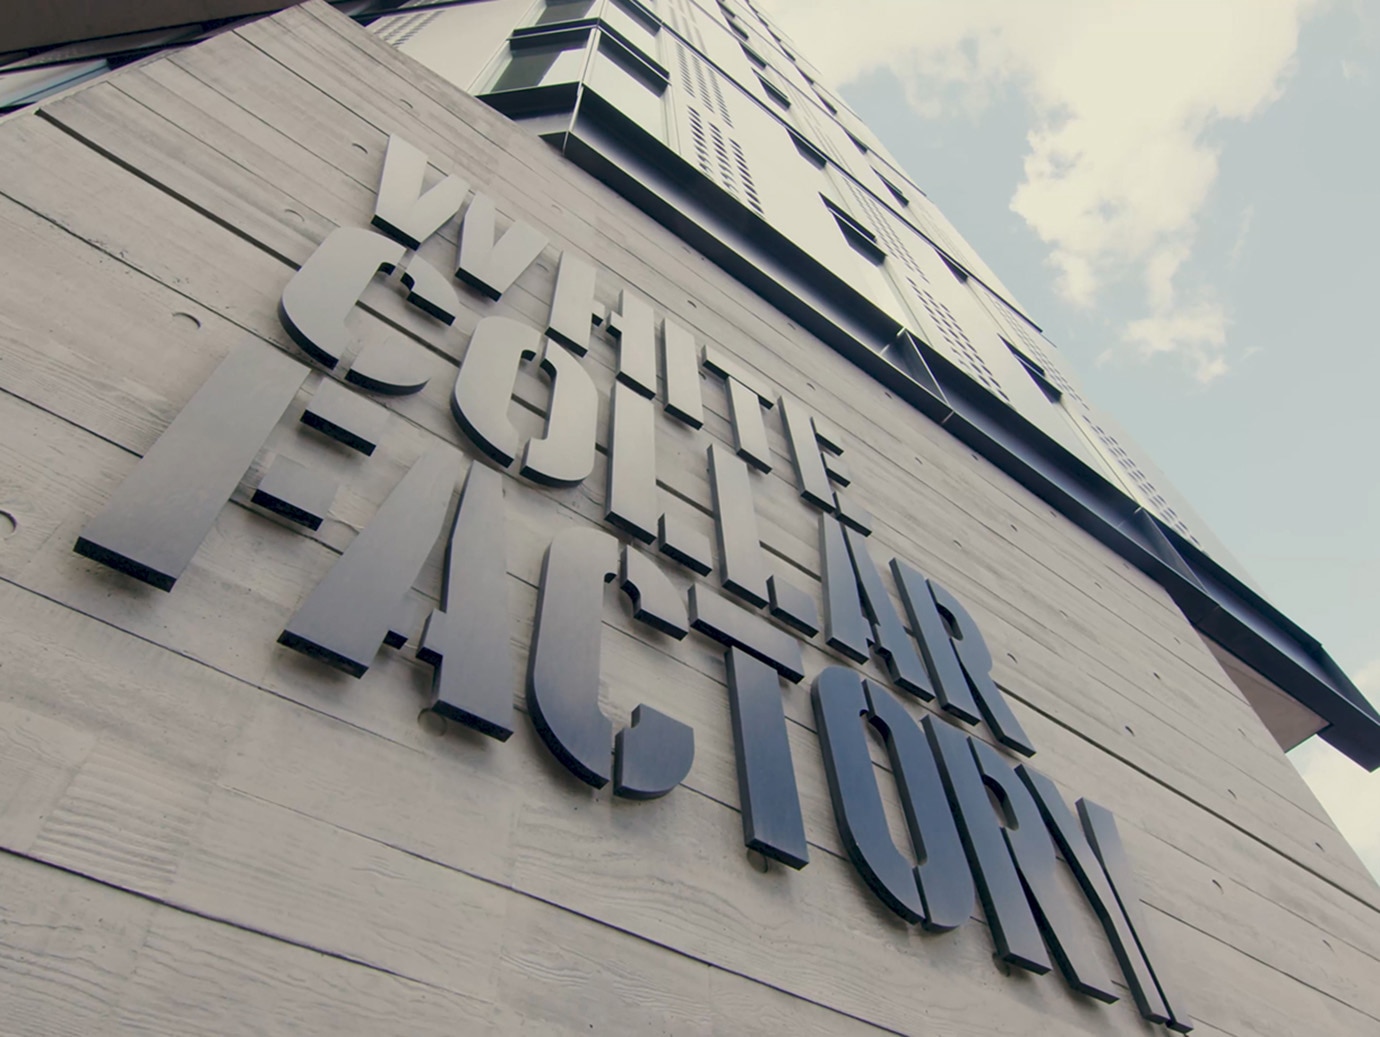 Close-up of a building with "White Collar Factory" written on it